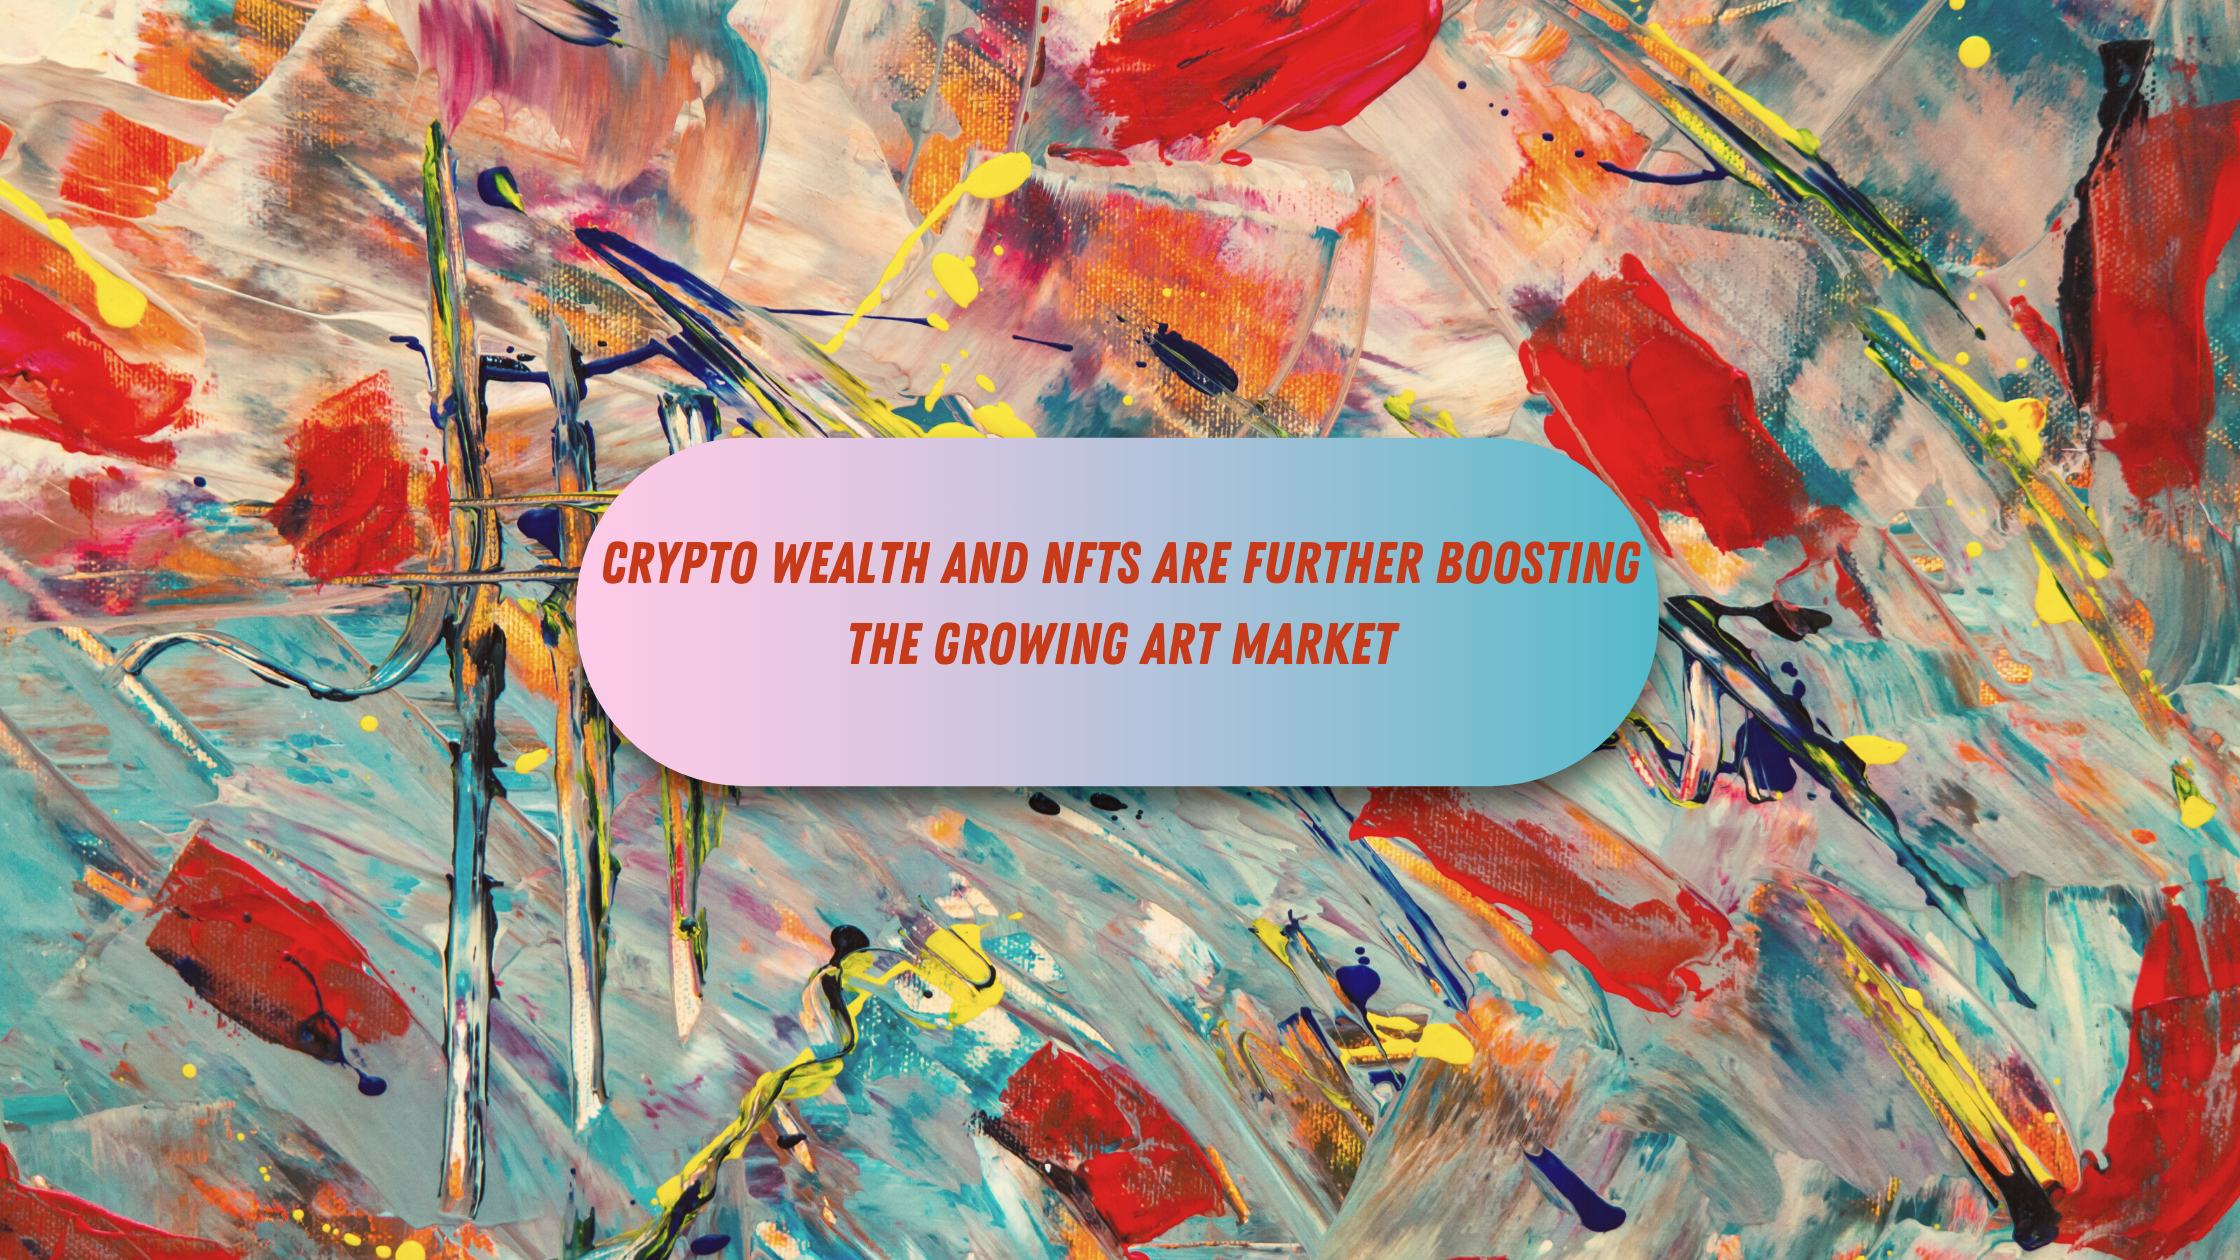 Crypto Wealth And NFTs Are Further Boosting The Growing Art Market